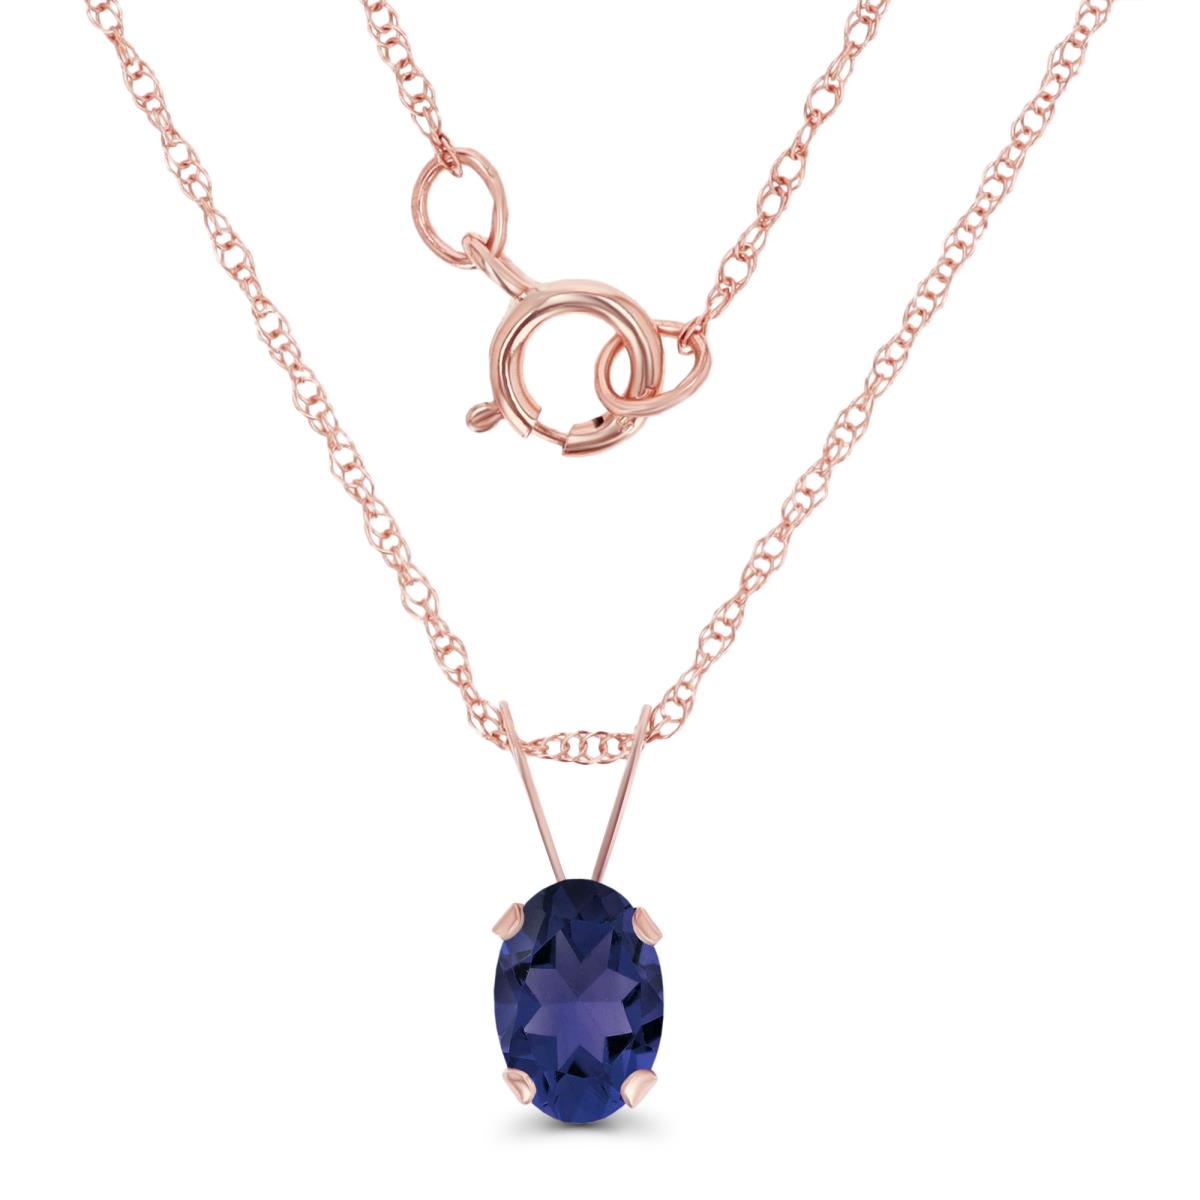 10K Rose Gold 6x4mm Oval Iolite 18" Rope Chain Necklace